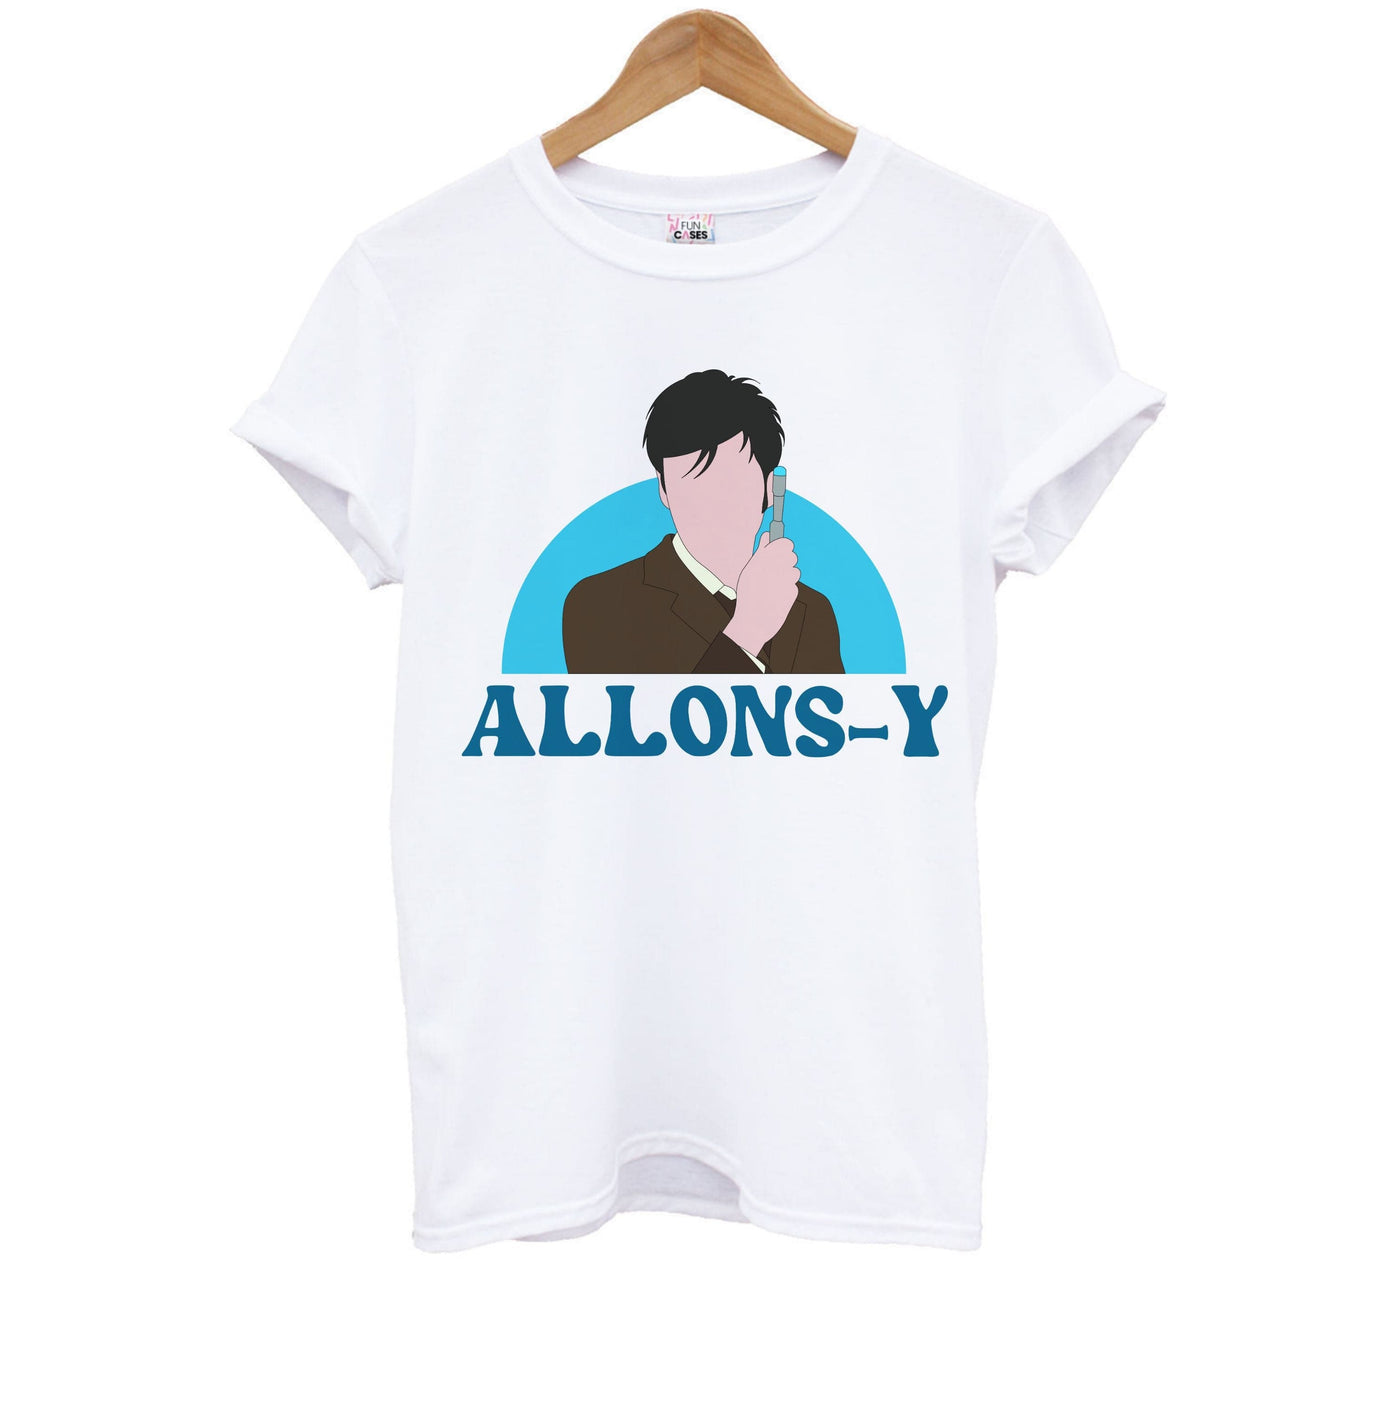 Allons-y - Doctor Who Kids T-Shirt